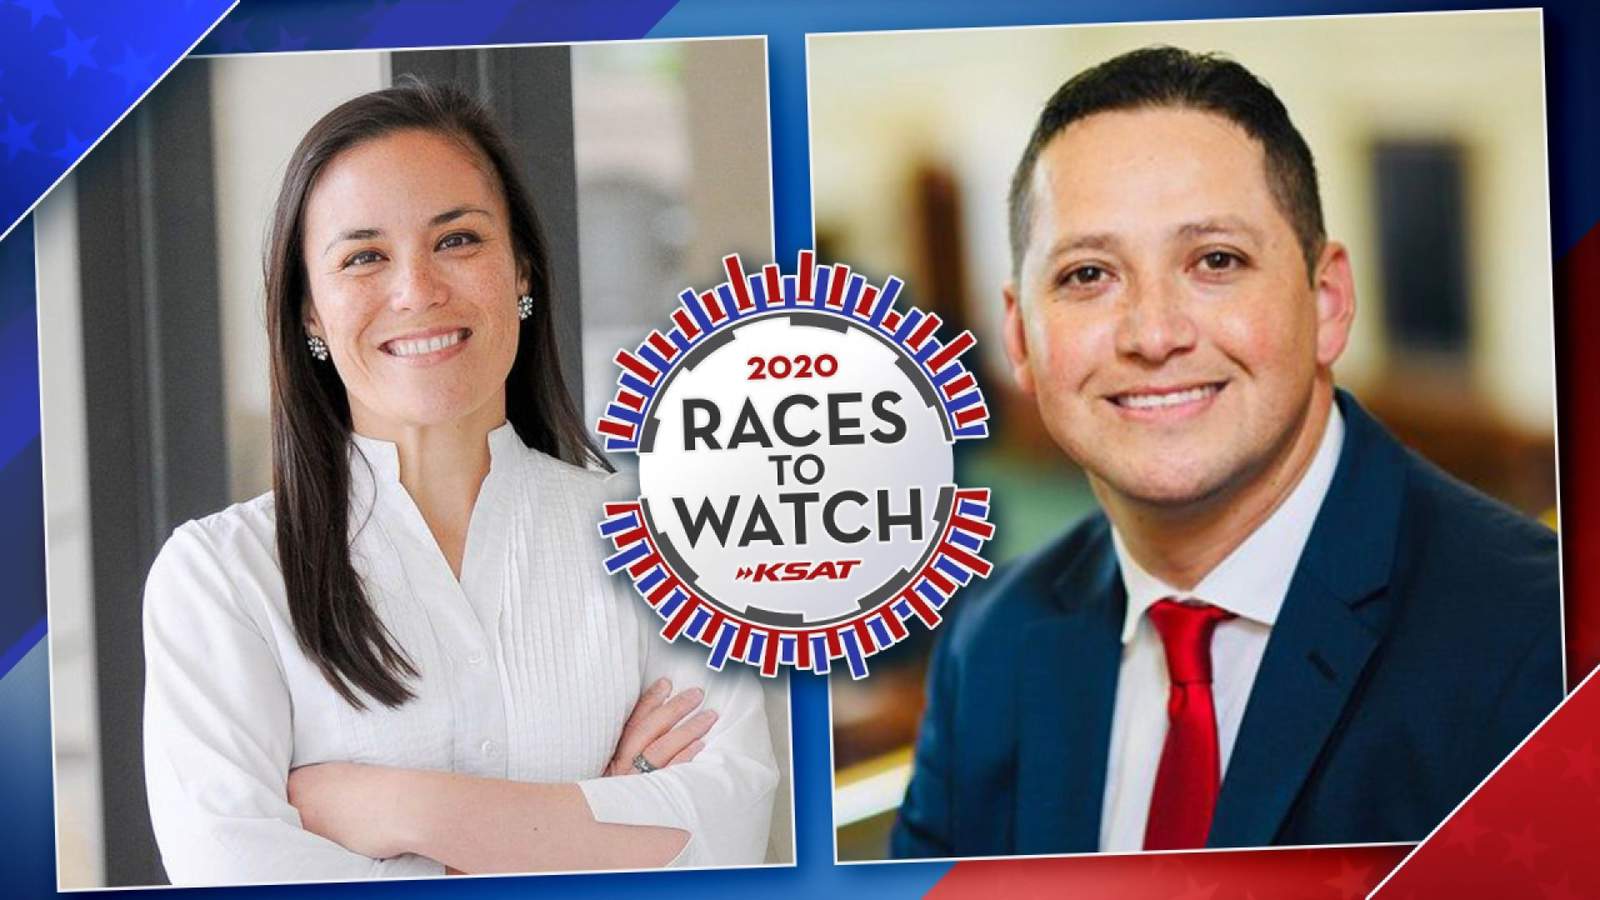 Texas Congressional District 23 candidates give their stance on the biggest issues facing their voters